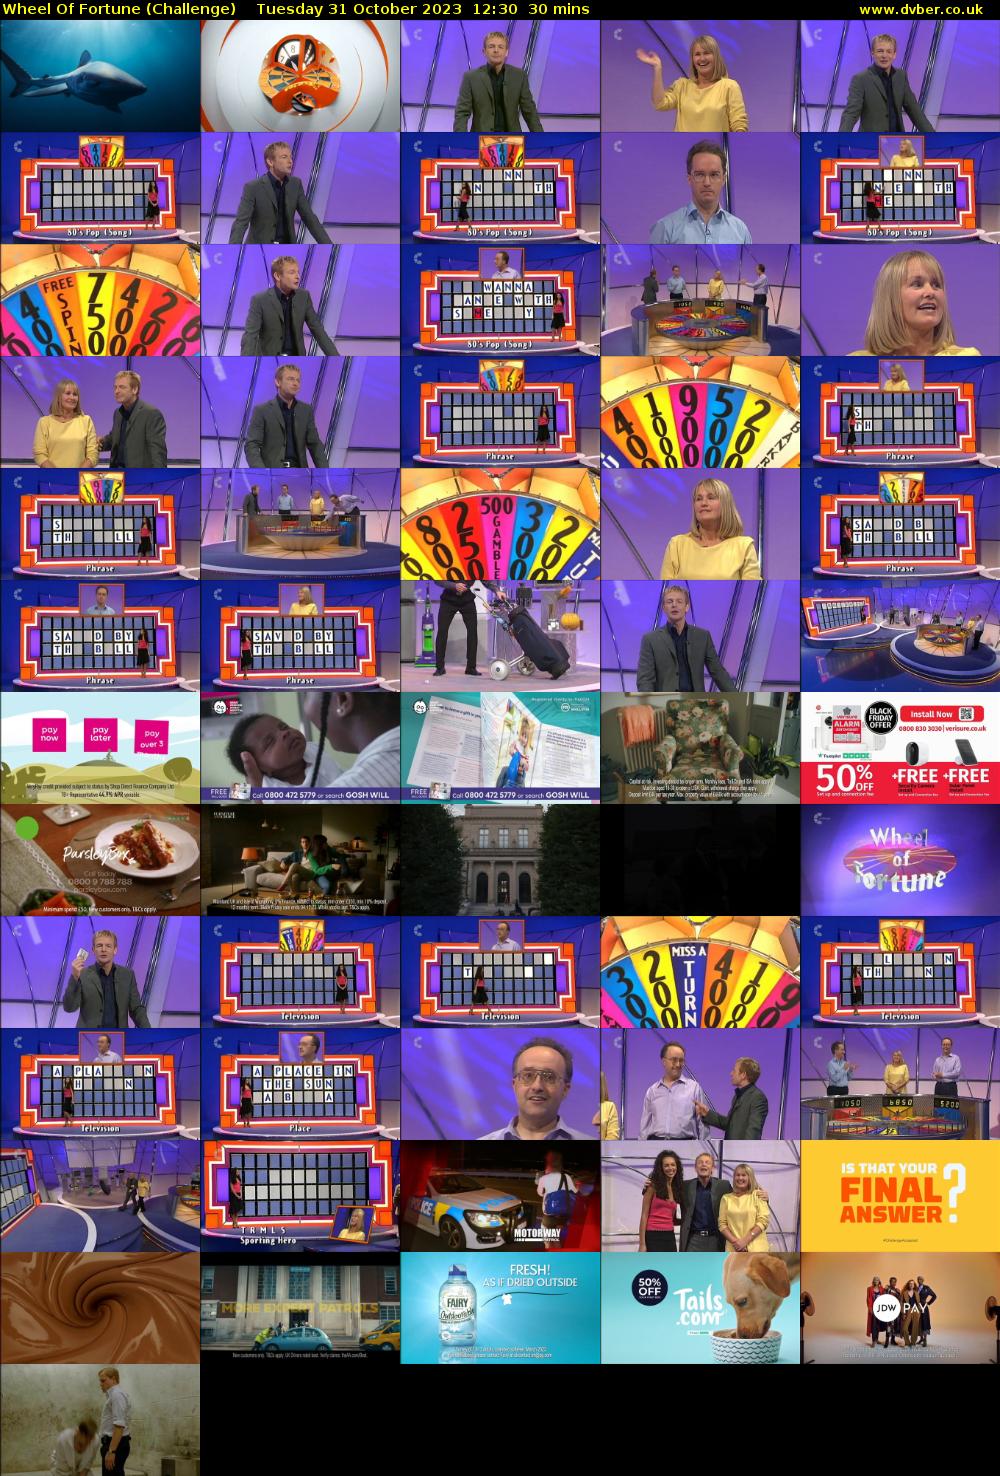 Wheel Of Fortune (Challenge) Tuesday 31 October 2023 12:30 - 13:00